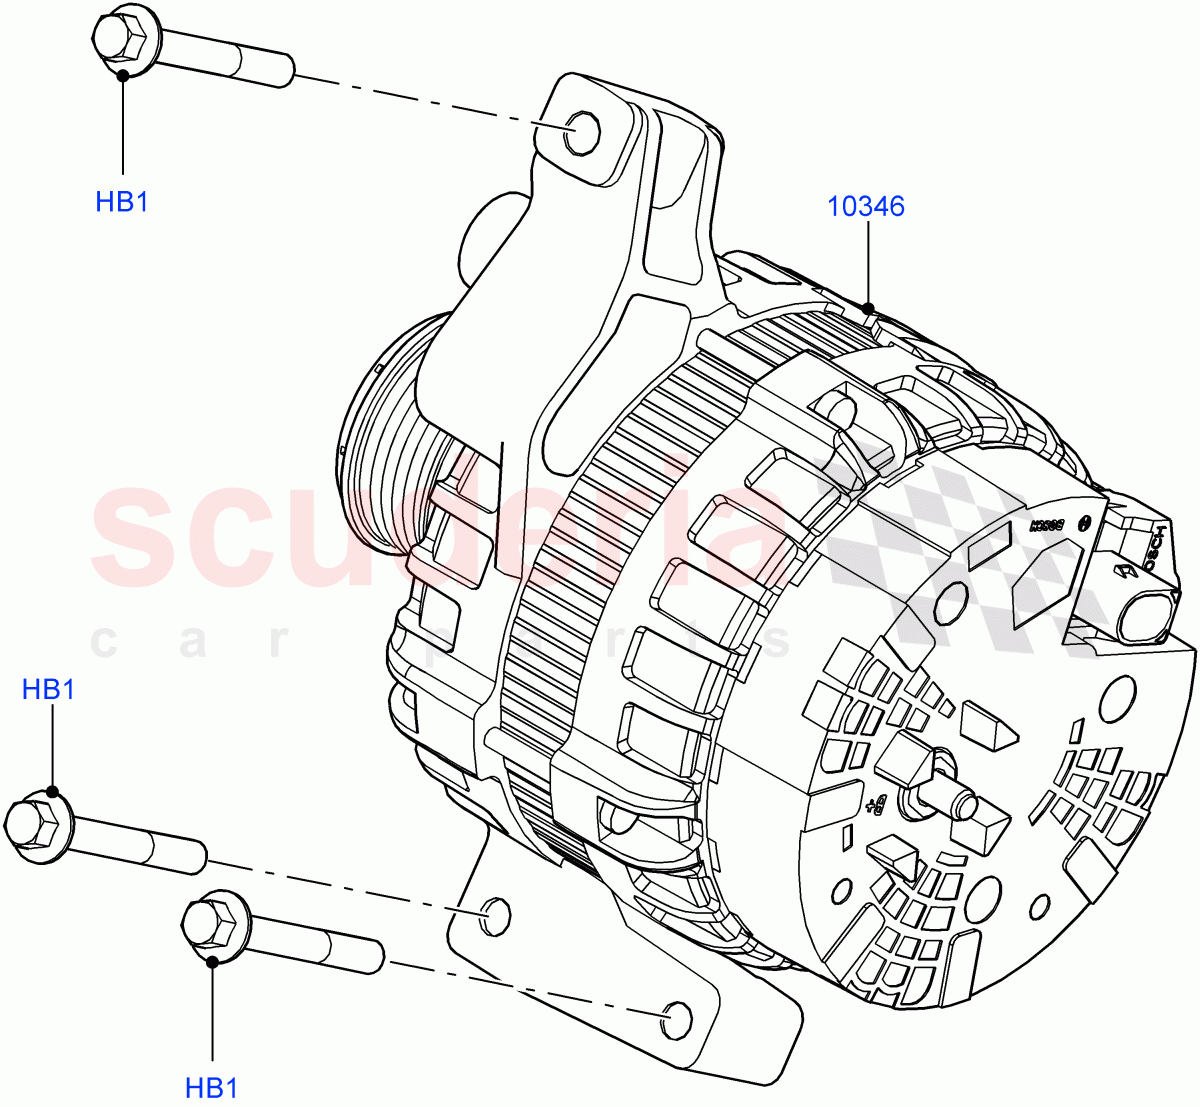 Alternator And Mountings(2.0L 16V TIVCT T/C Gen2 Petrol,Halewood (UK),2.0L 16V TIVCT T/C 240PS Petrol) of Land Rover Land Rover Discovery Sport (2015+) [2.0 Turbo Diesel AJ21D4]